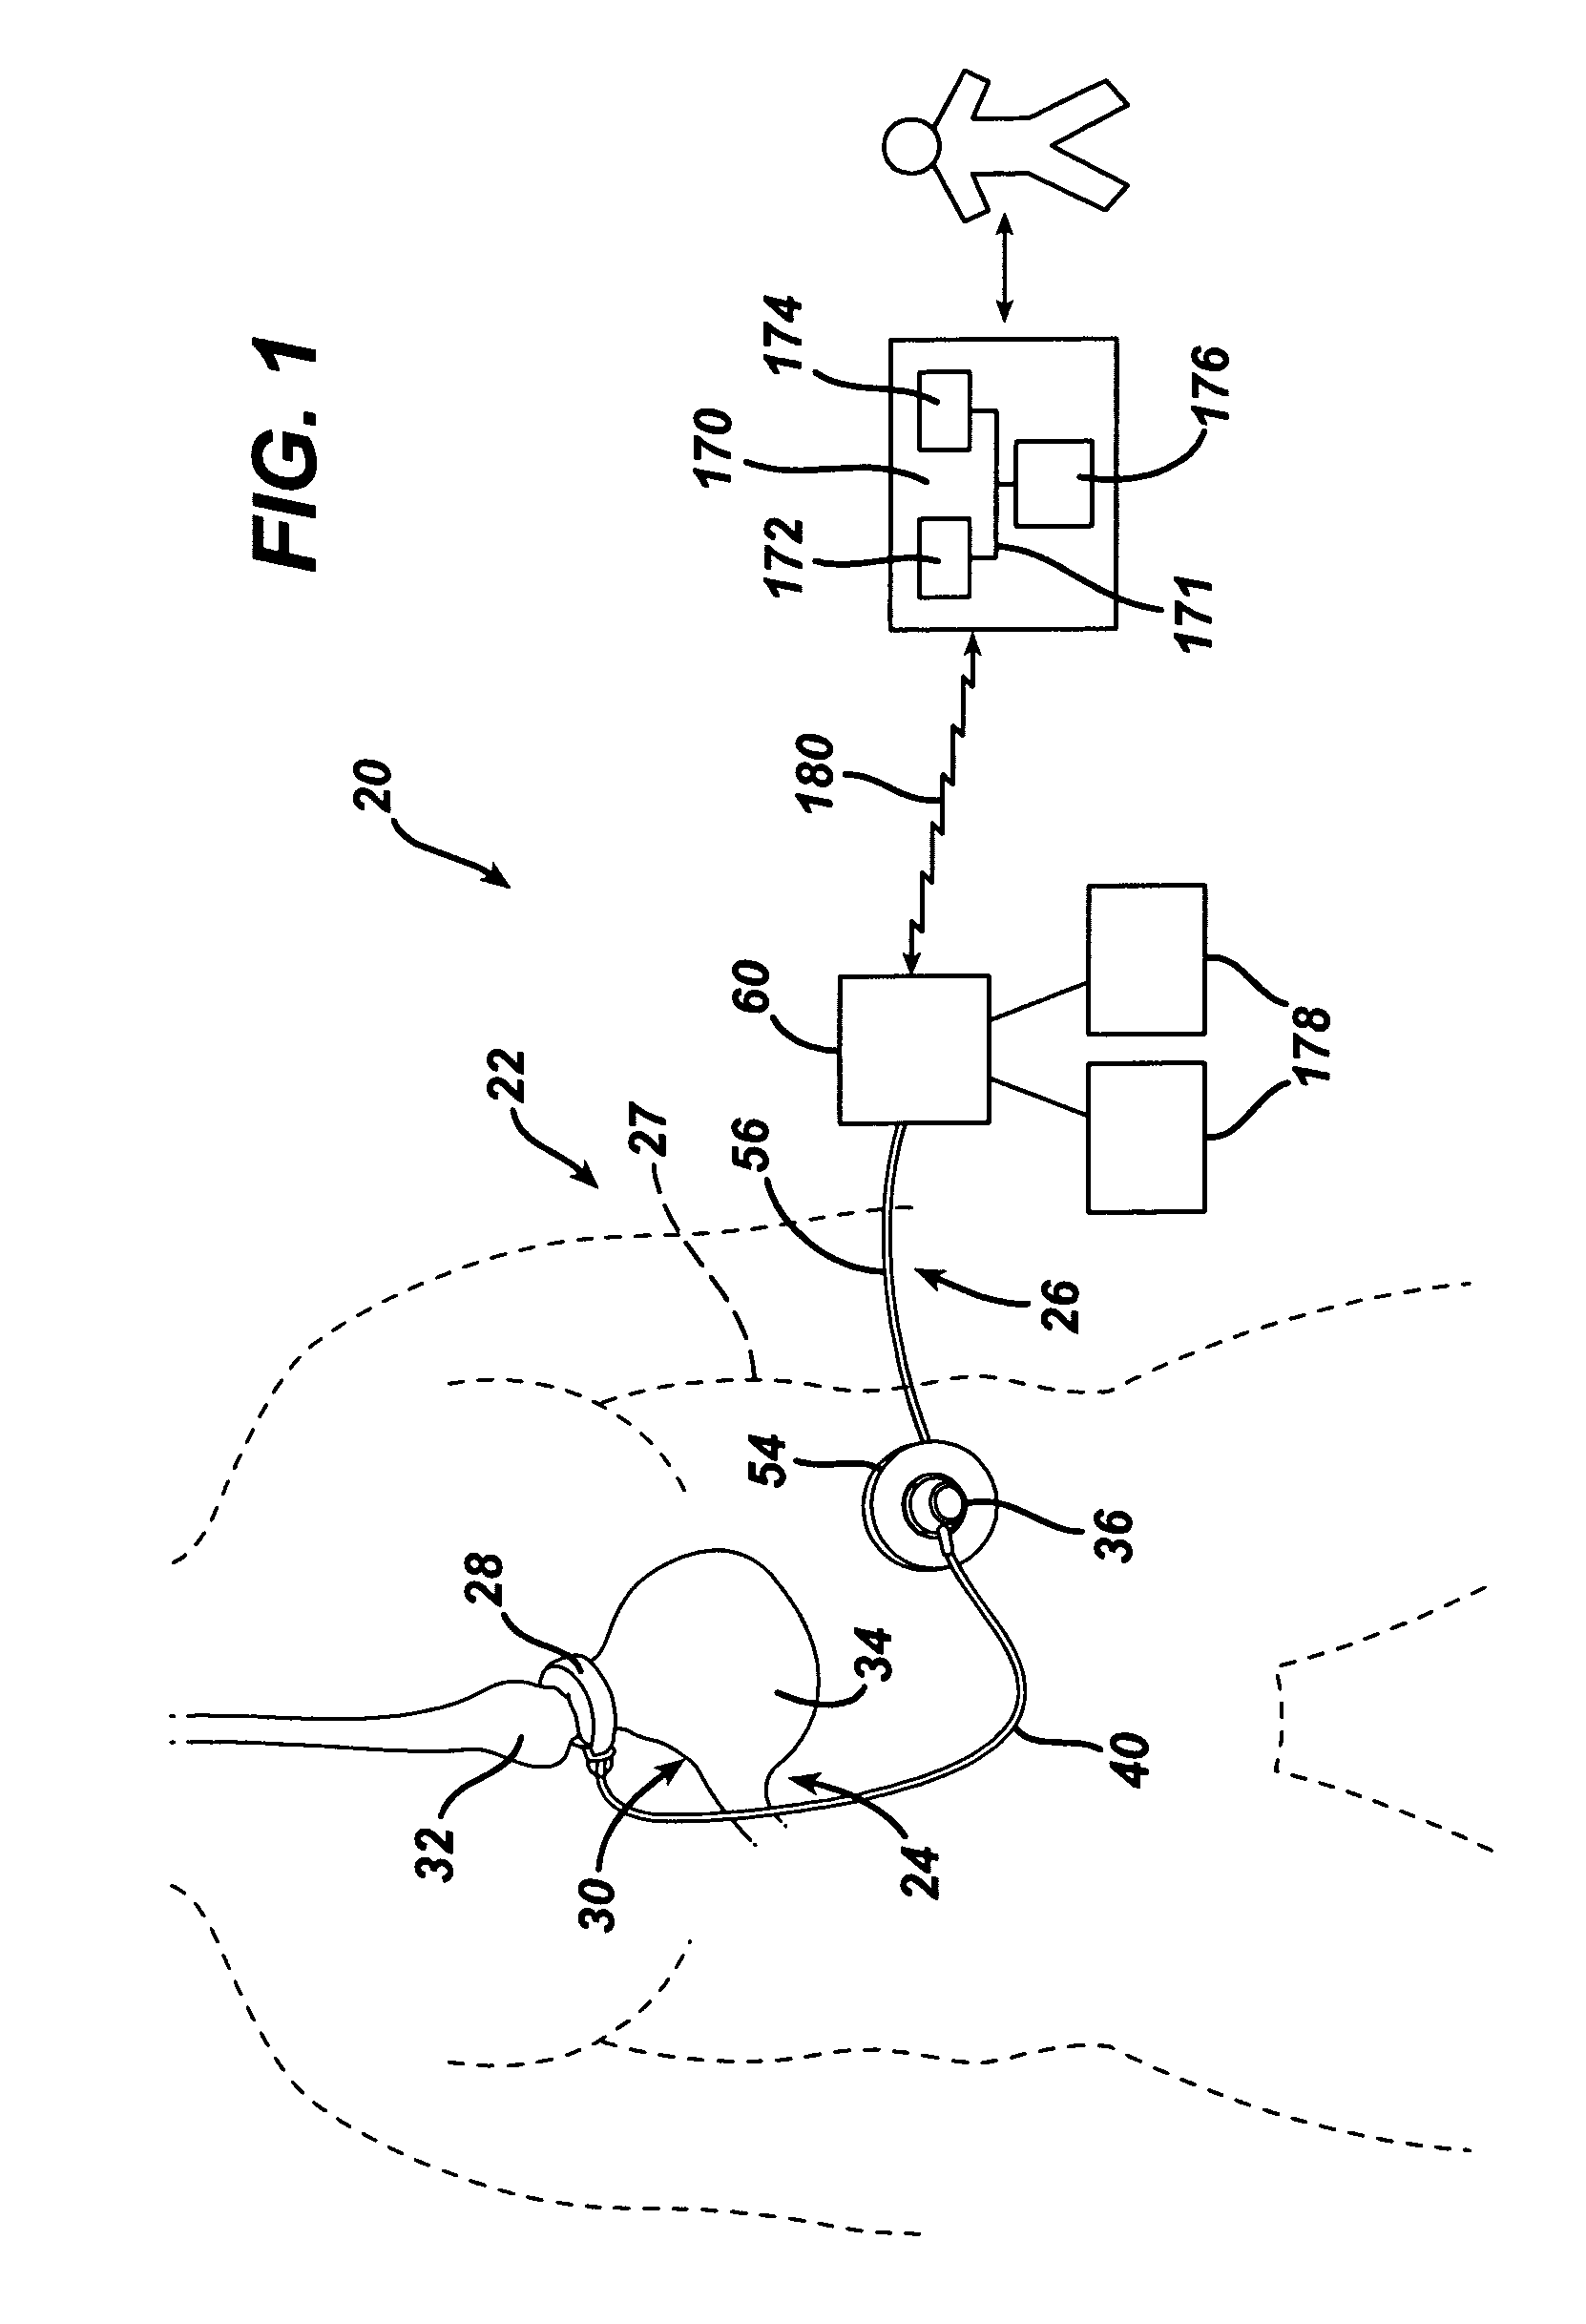 Data Analysis for an Implantable Restriction Device and a Data Logger